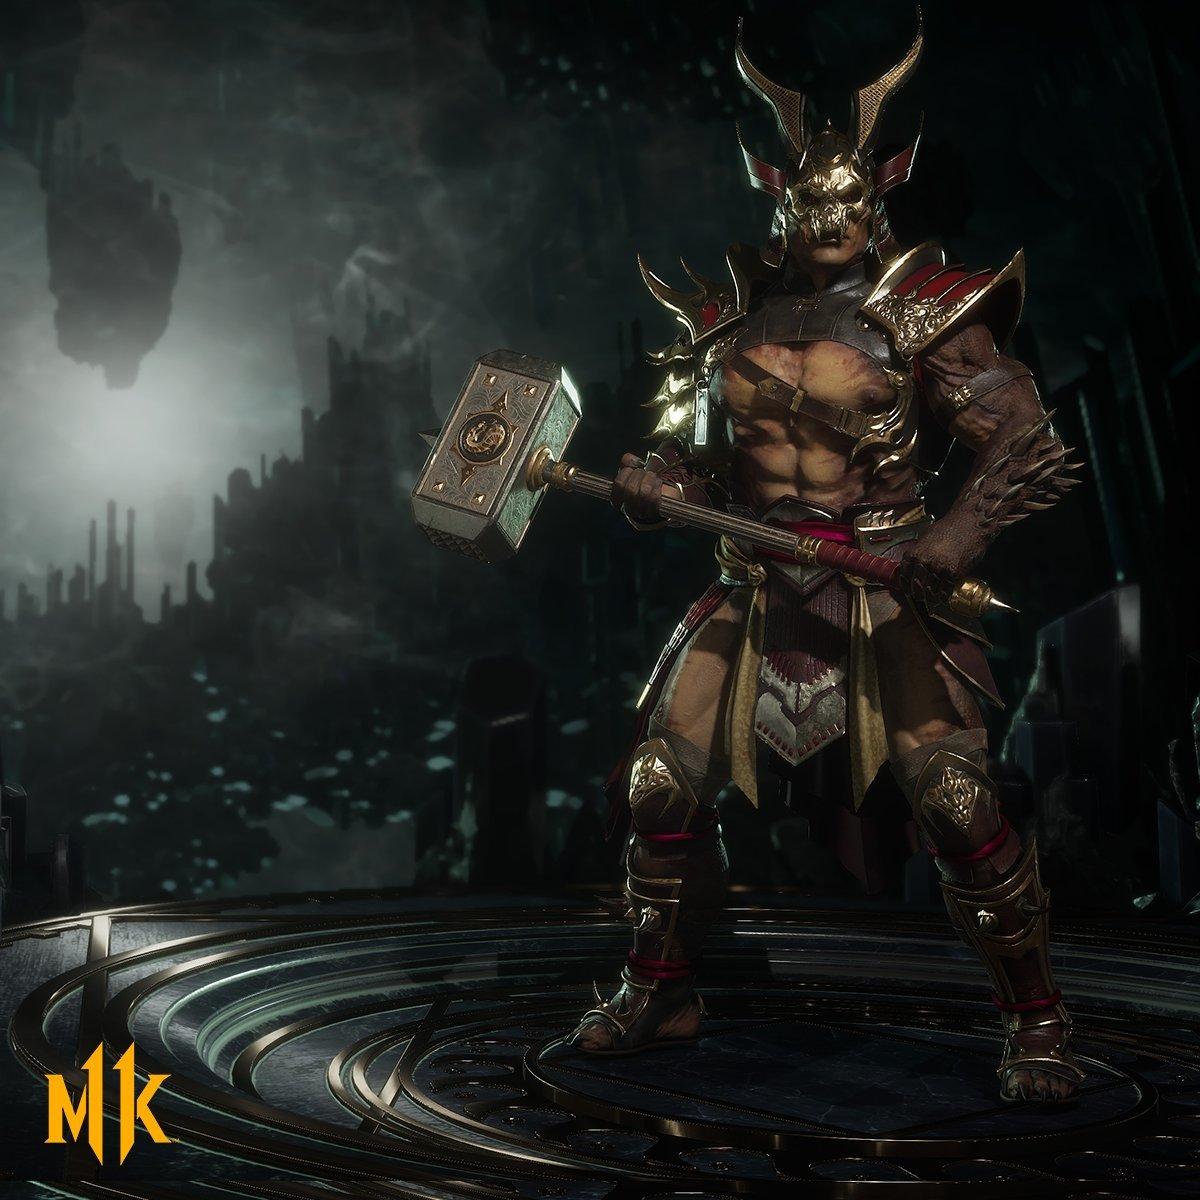 Shao Kahn screenshots, image and picture